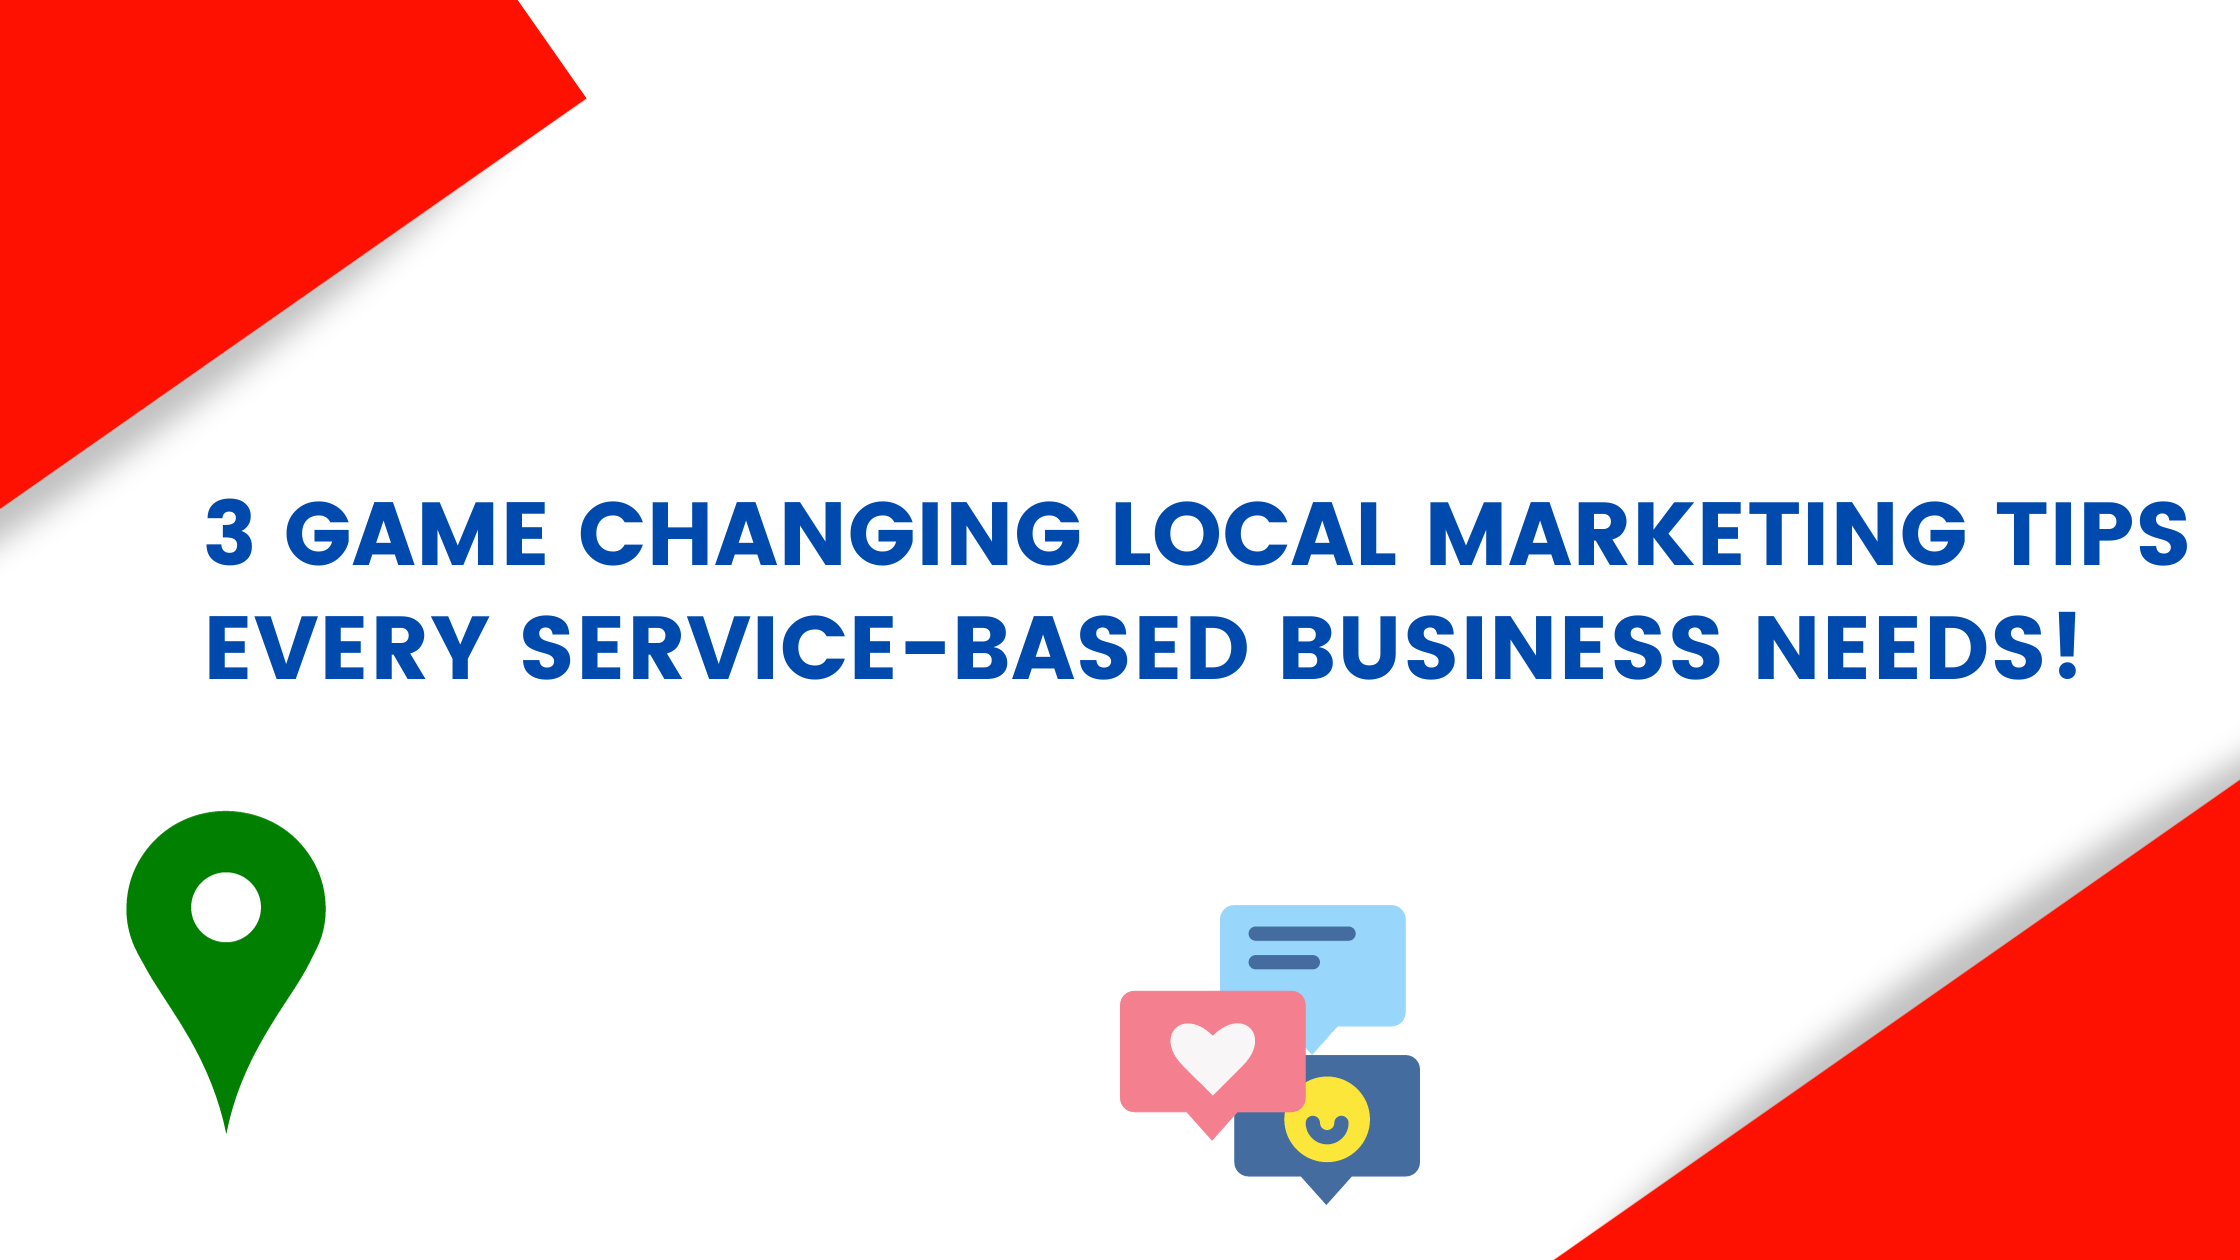 3 Local Marketing Tips Every Service-Based Business Needs!